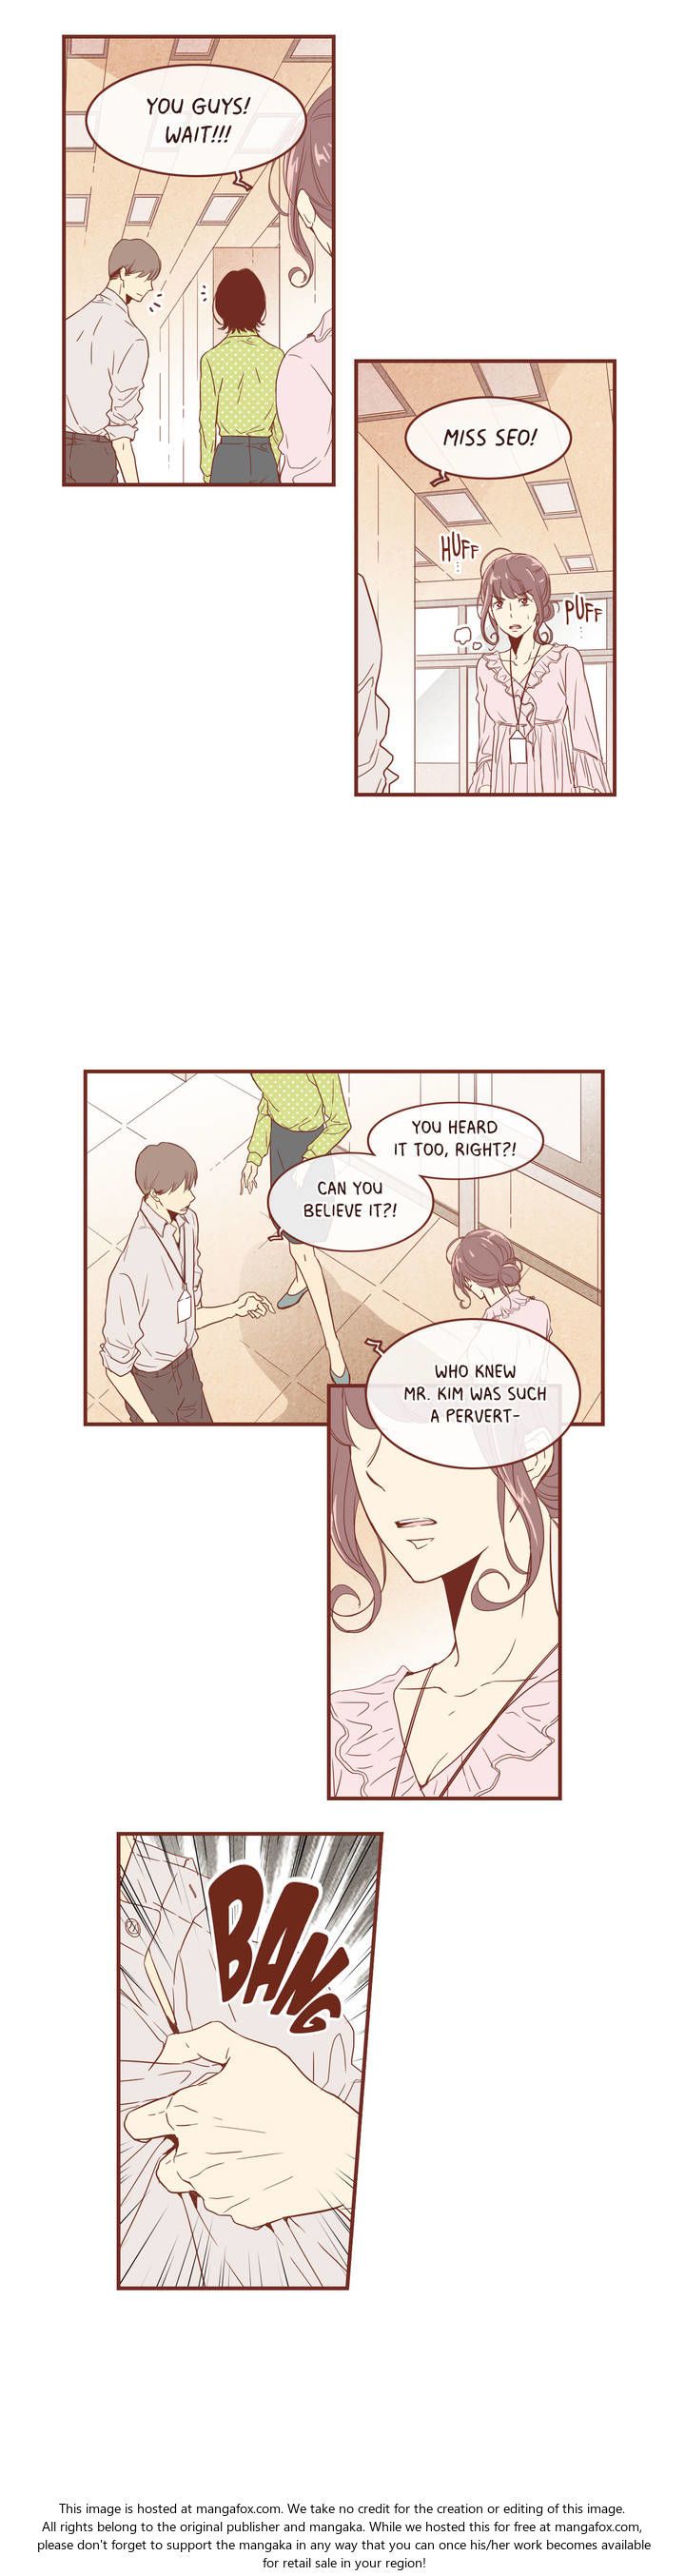 Why Did Men Stop Wearing High Heels? Chapter 051 page 10